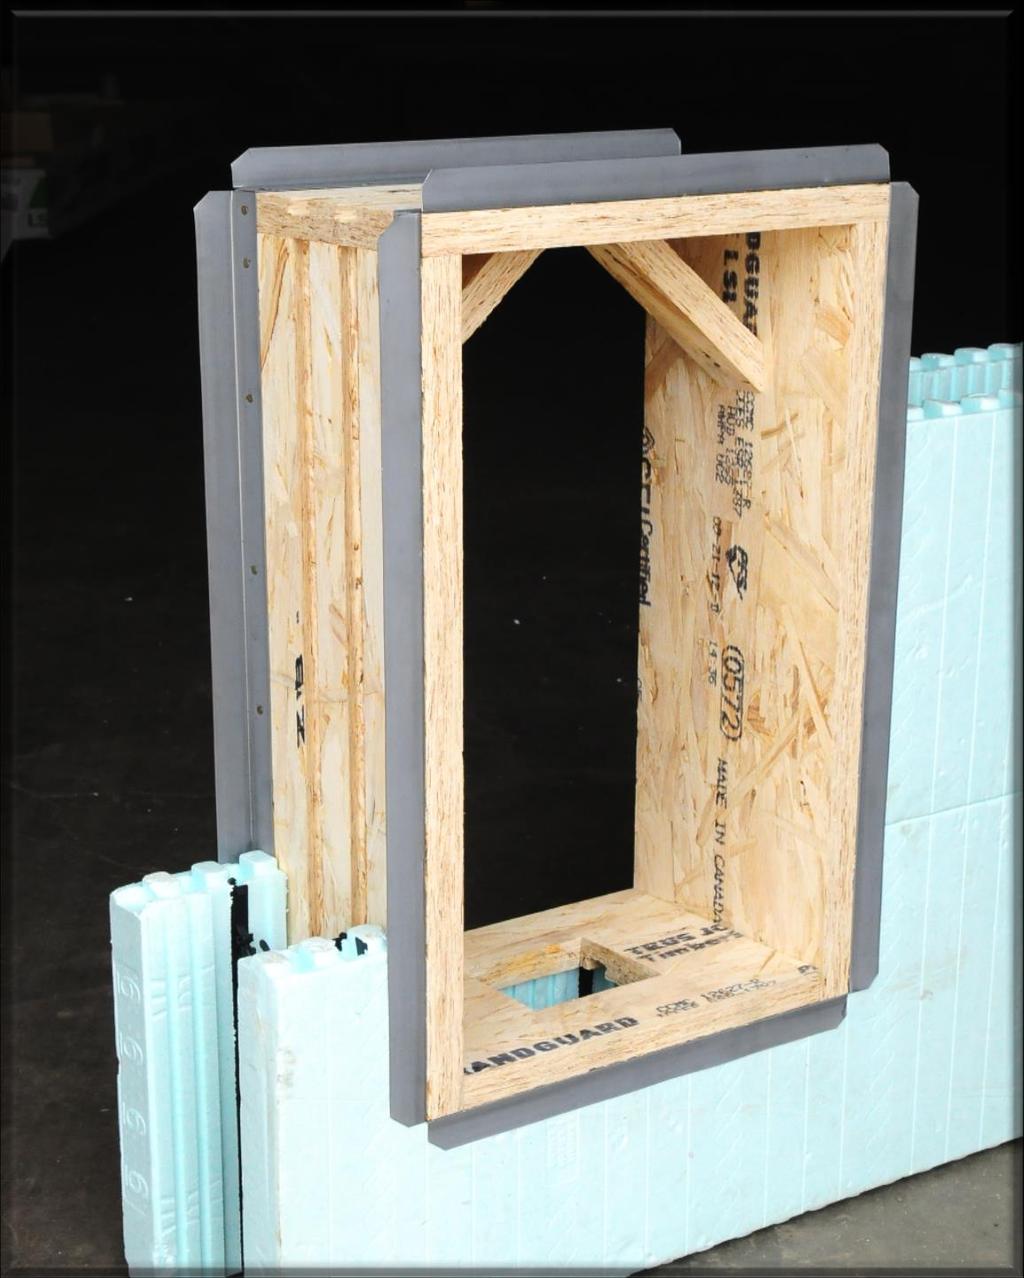 Engineered Framing System Designed for ICF Insulated Concrete